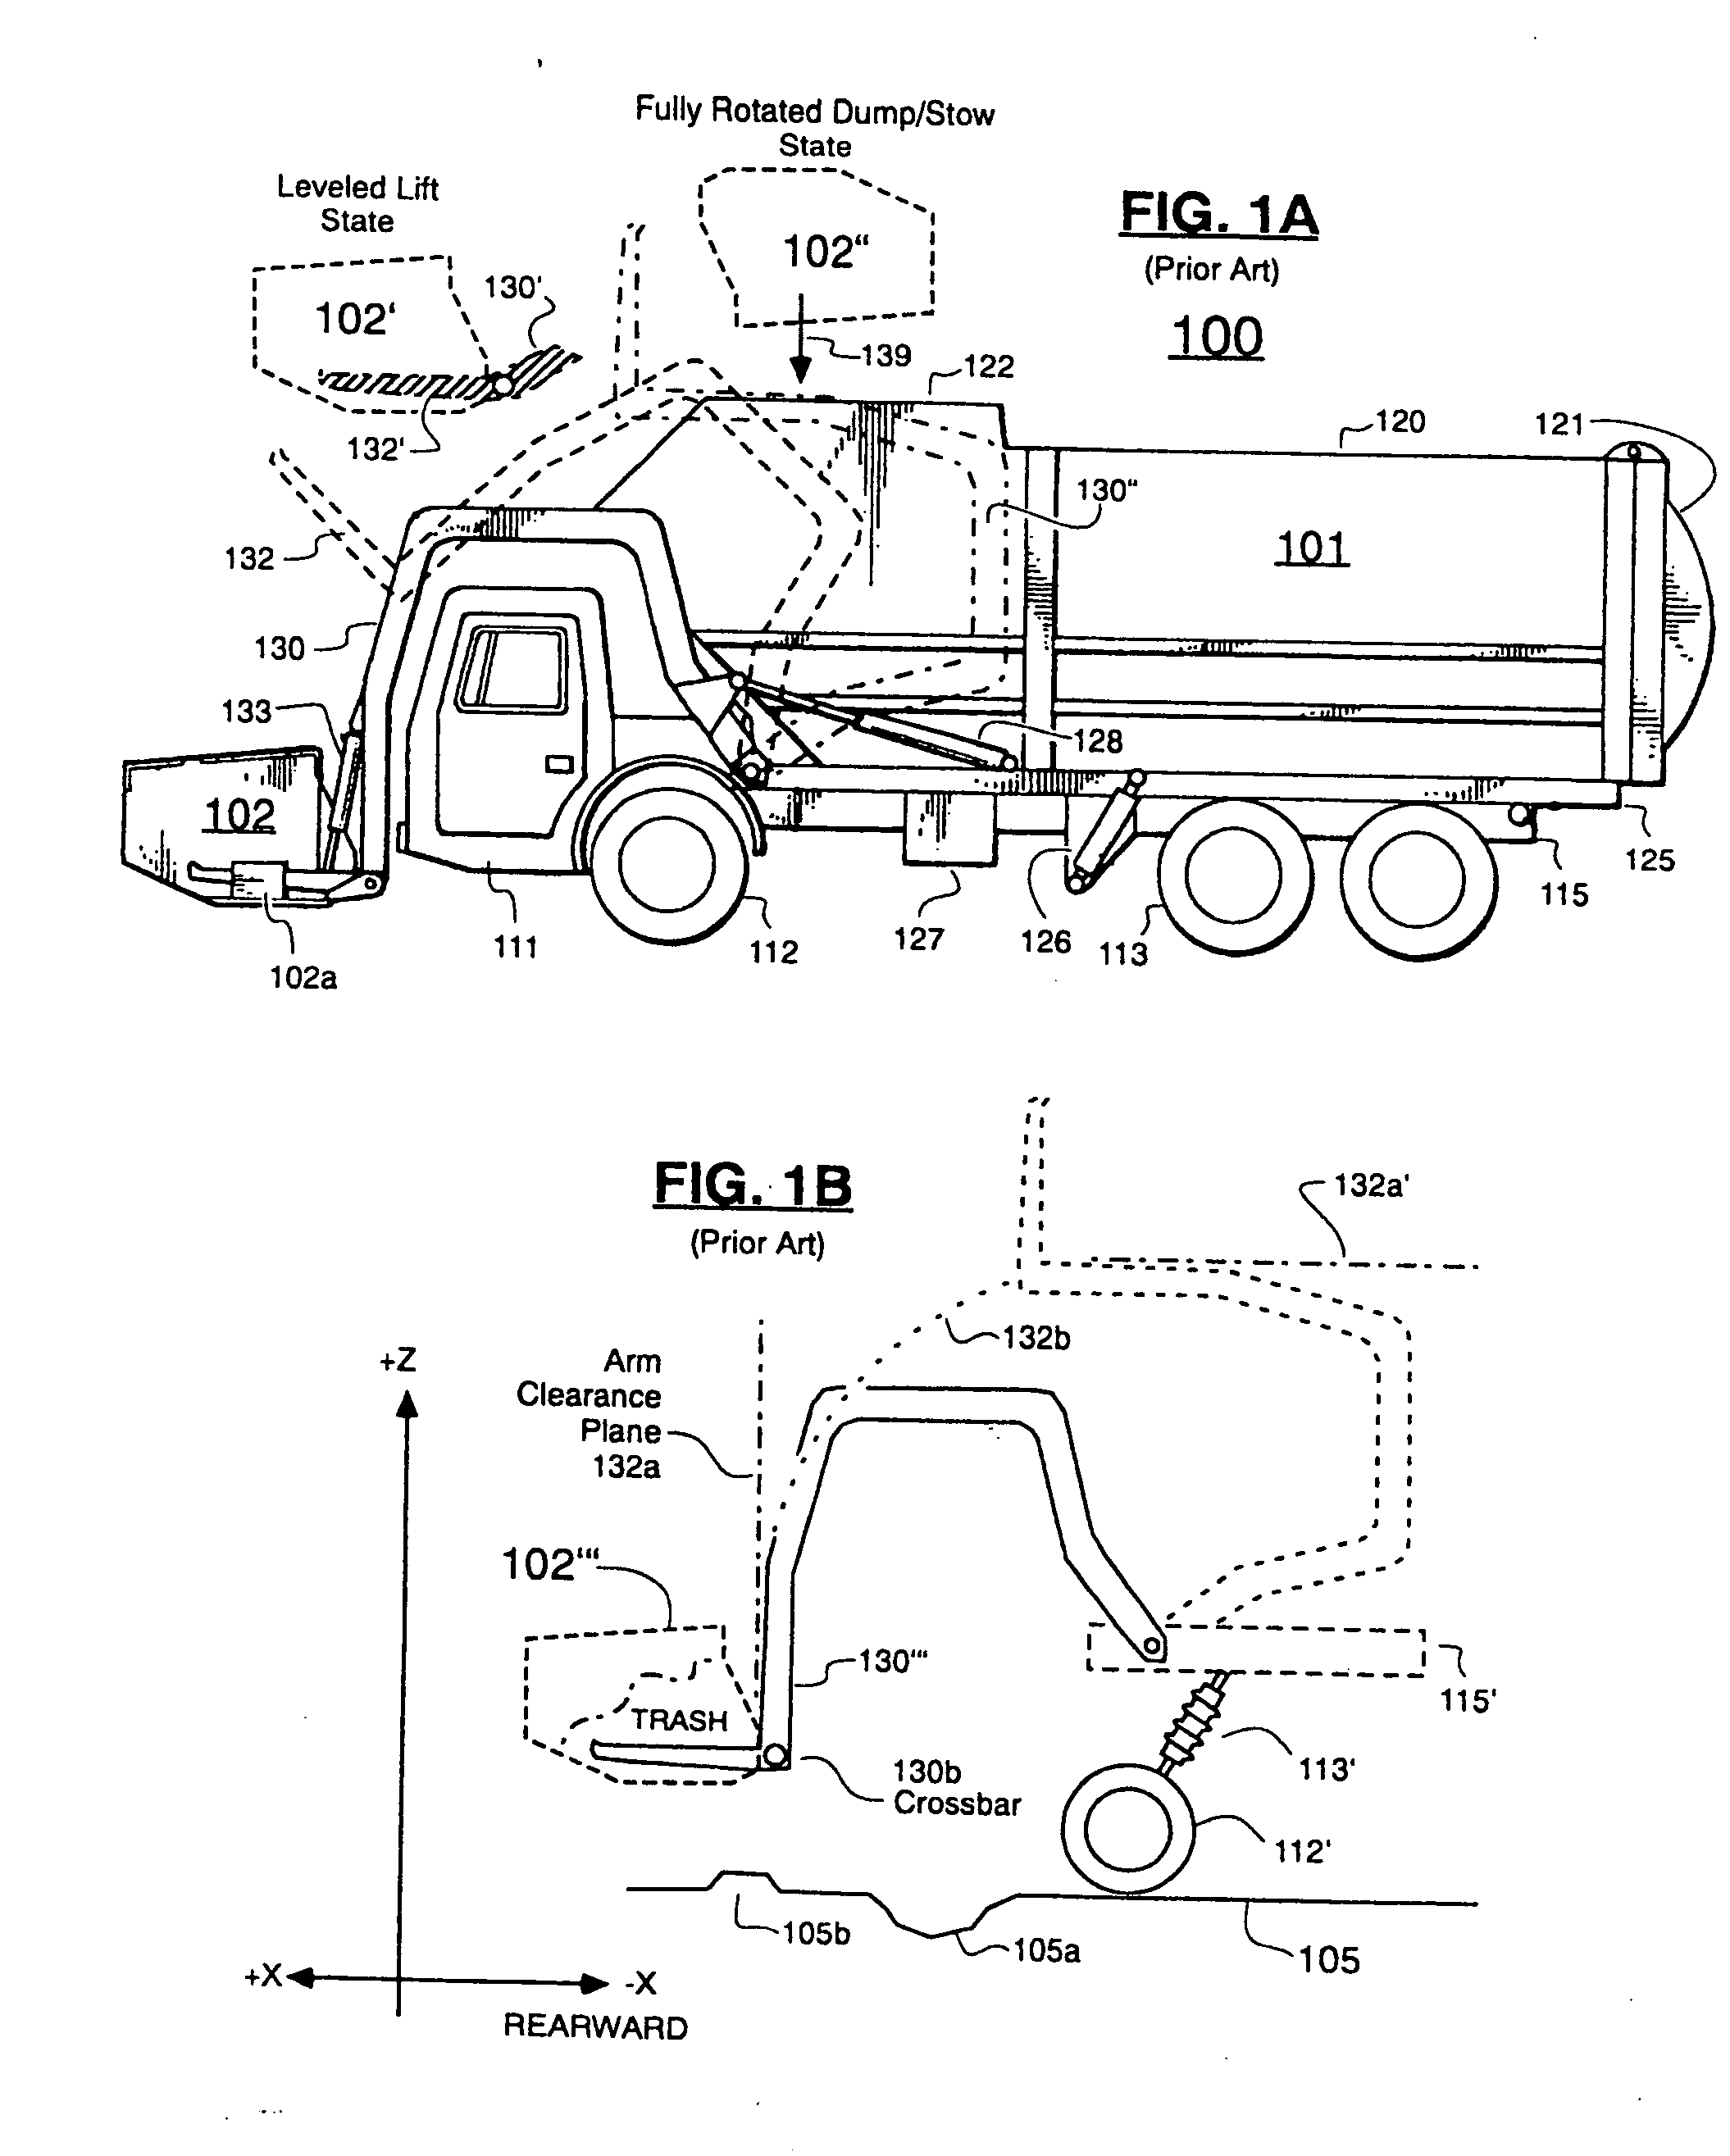 Front-loadable refuse container having side-loading robotic arm with motors and other mass mounted at rear of container and use of same with front-loading waste-hauling vehicle having hydraulic front forks or other retractably engageable lift means